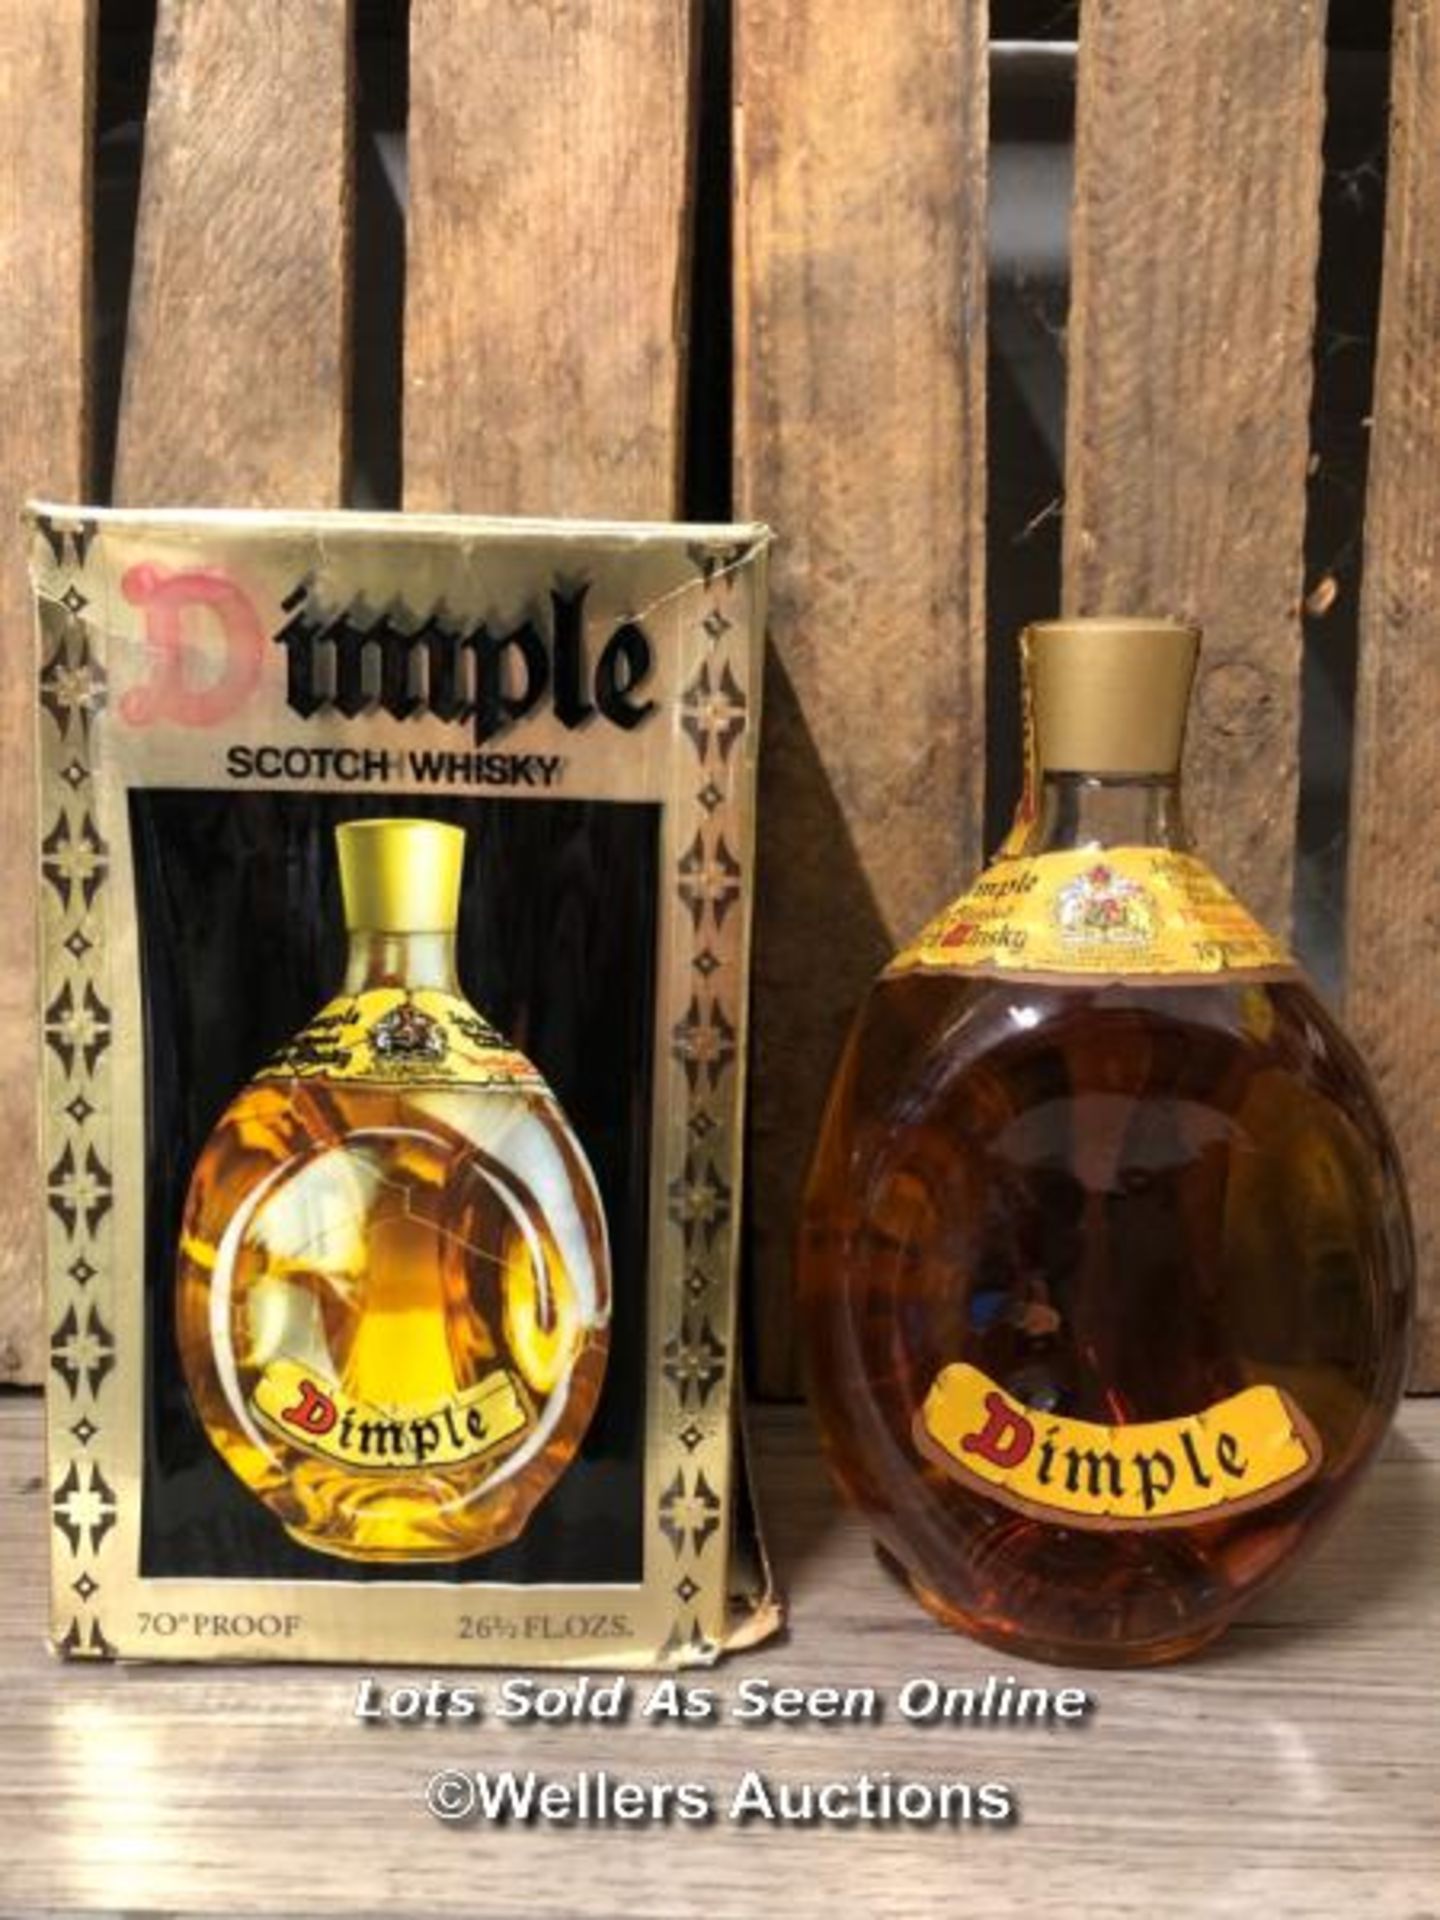 JOHN HAIG & CO. DIMPLE OLD BLENDED SCOTCH WHISKY, BOTTLED 1970'S, 75.7CL, 35% ABV, WITH ORIGINAL BOX